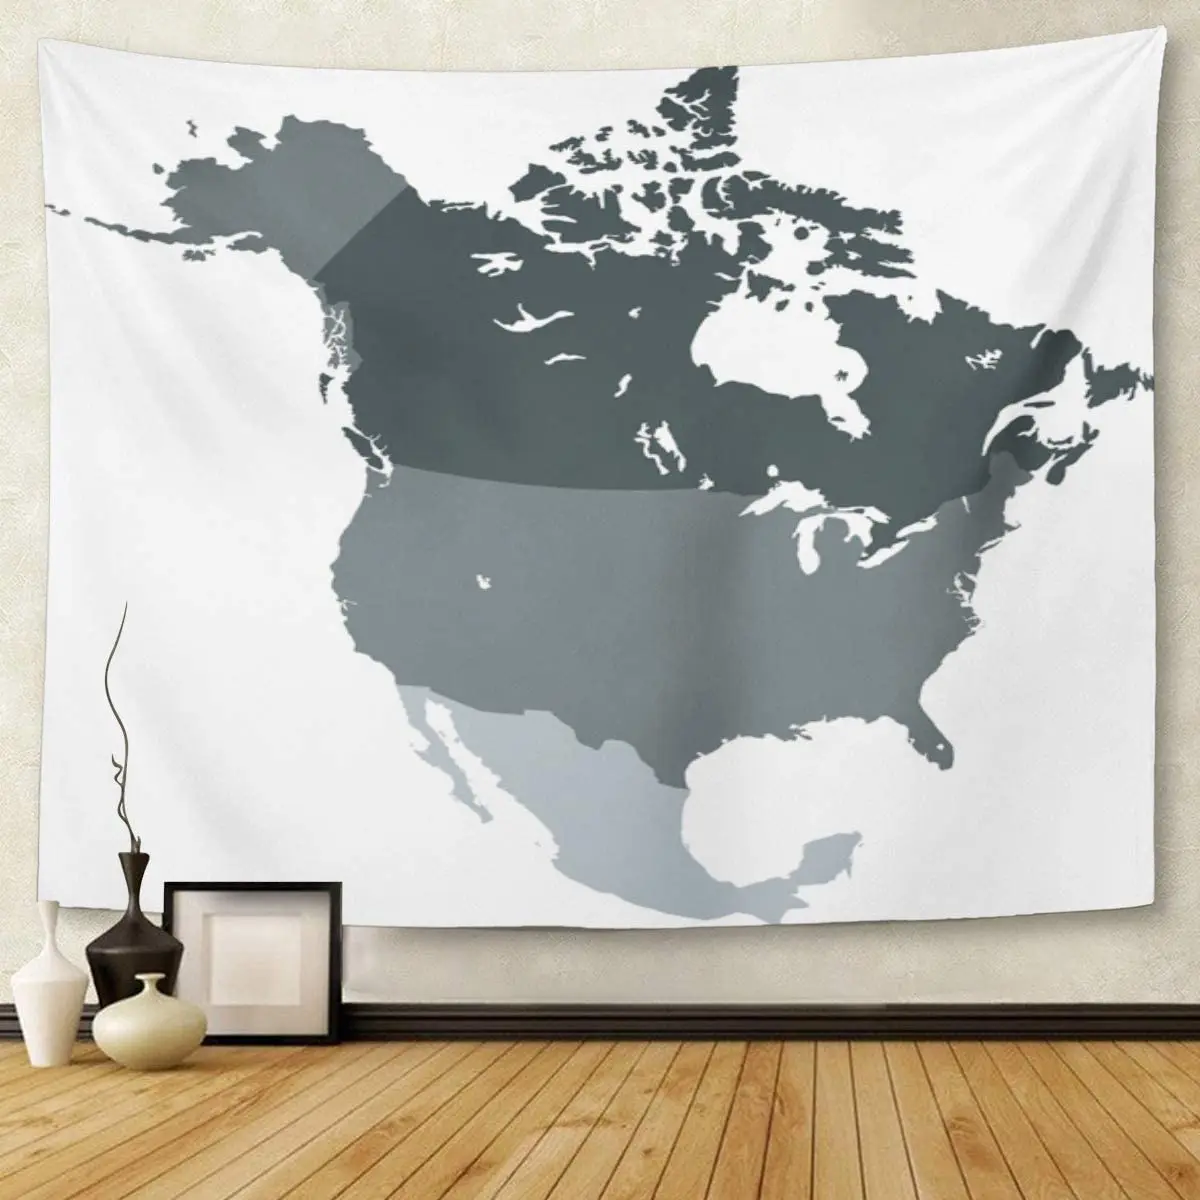 Mexico North America Map Canada USA World Abstract Alaska Tapestry Home Decor Wall Hanging for Living Room Bedroom Dorm 50x60 | Дом и сад